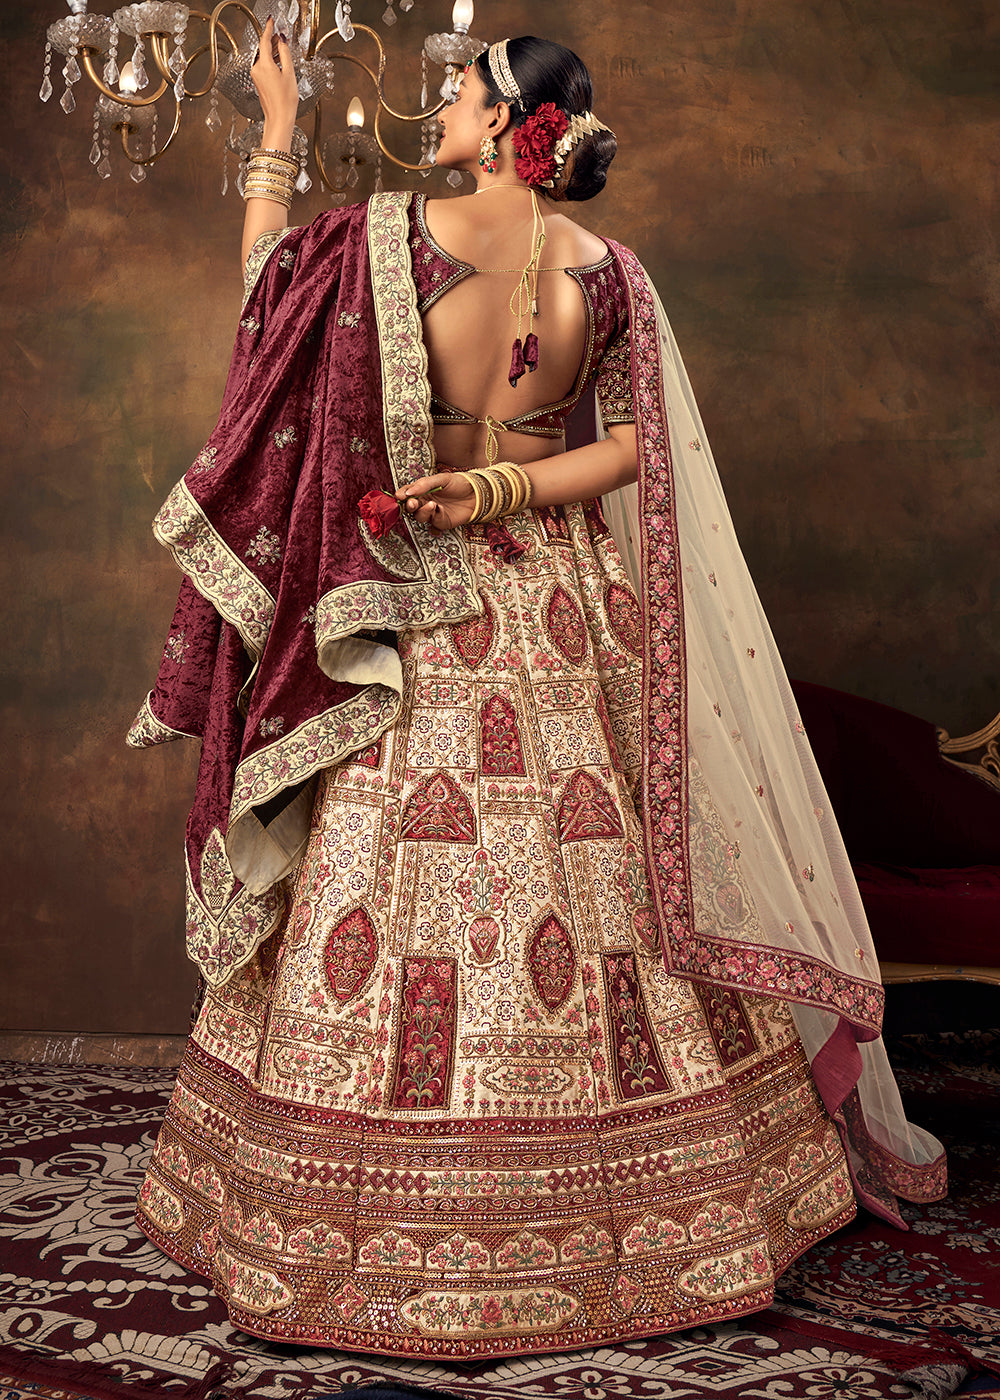 Buy Now Chickoo Beige Velvet Hand Embroidered Bridal Lehenga Choli Online in USA, UK, Canada & Worldwide at Empress Clothing.